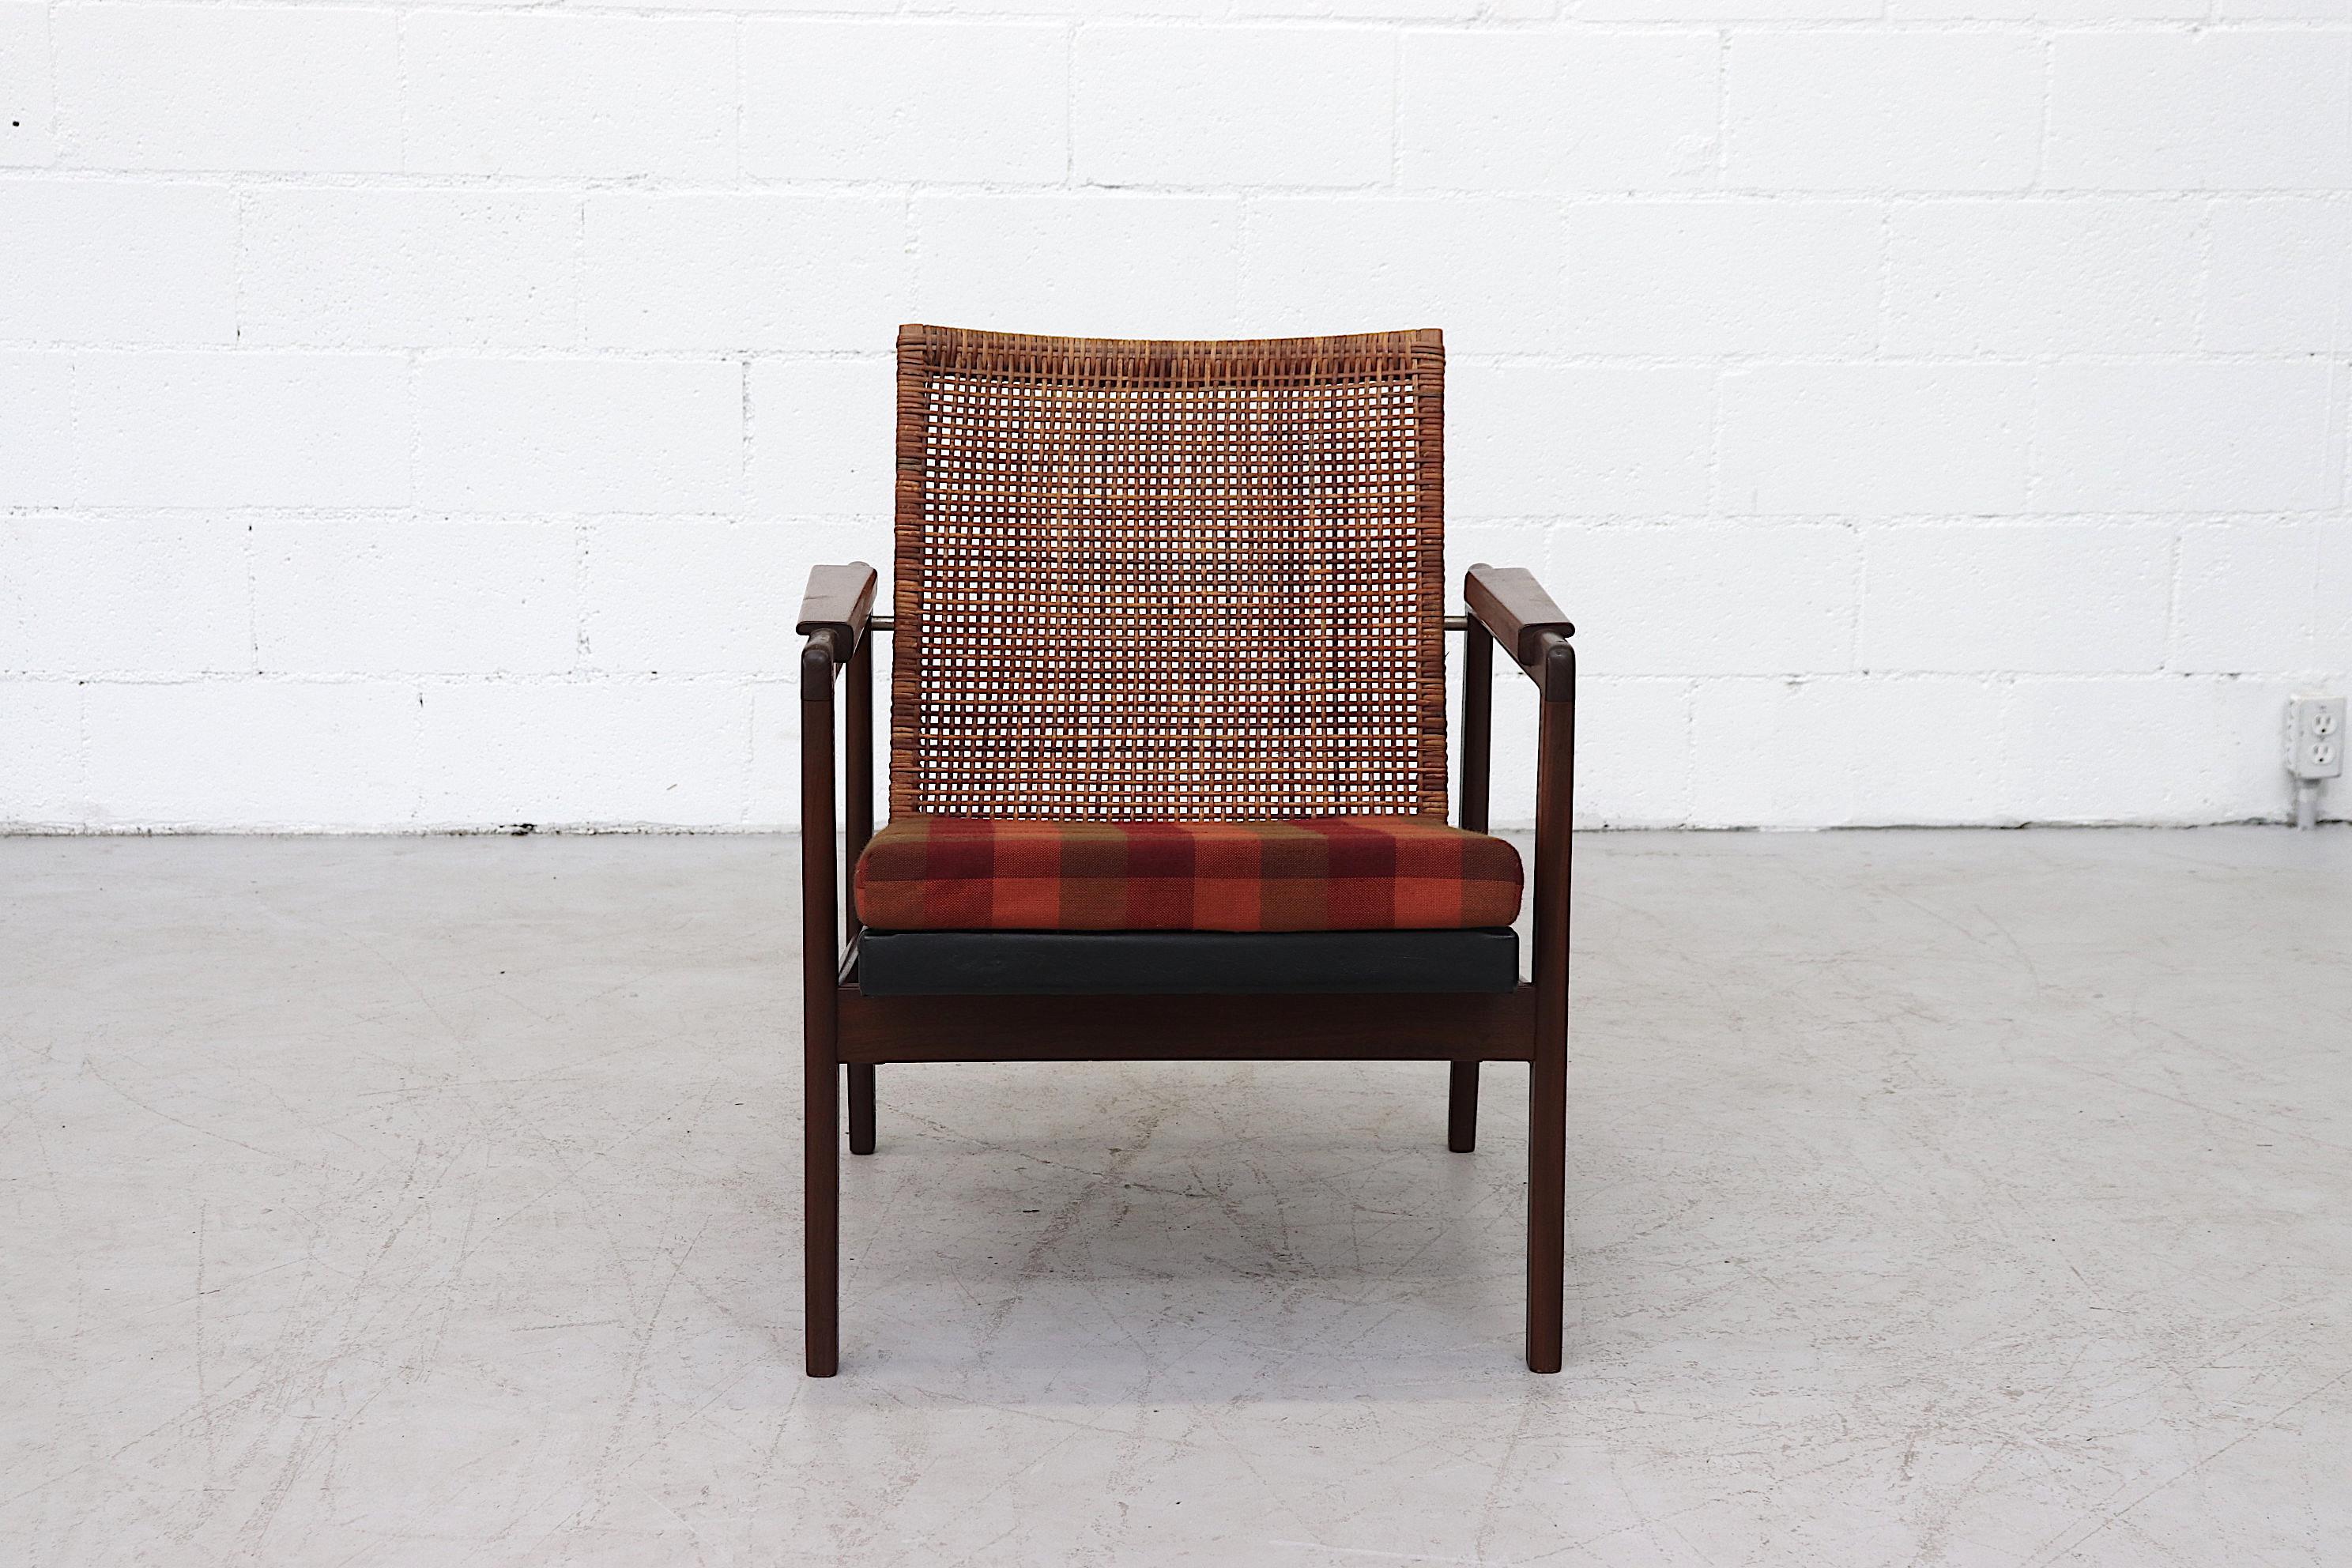 Amazing teak and rattan Muntendam lounge chair with original plaid cushion. Some breakage to the rattan (pictured), and some fraying to cushion fabric in original condition with visible wear consistent with its age and use.